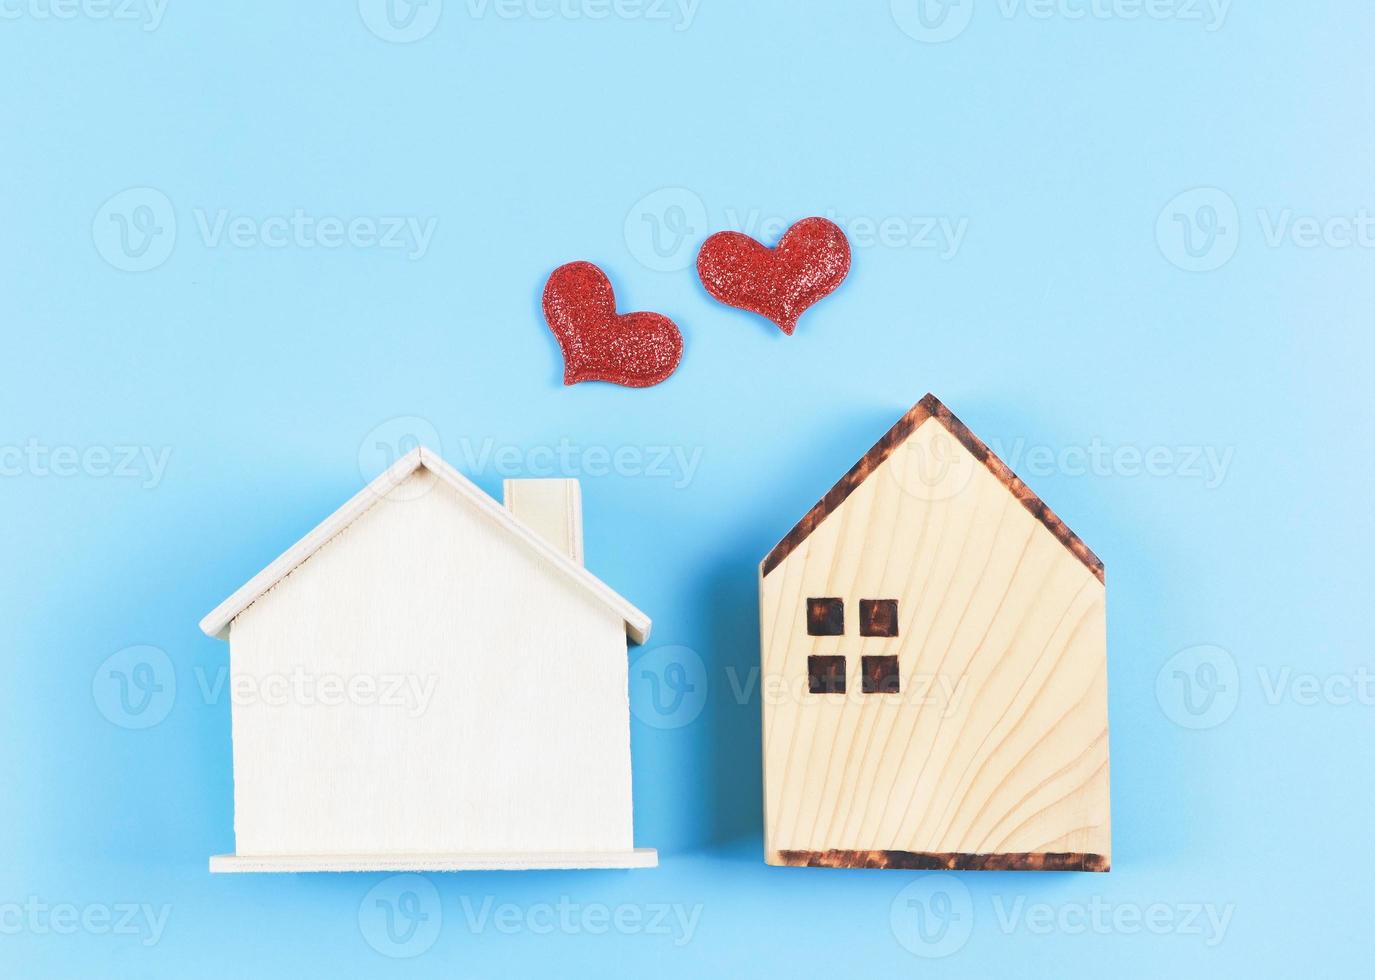 flat lay of two wooden model houses with red glitter hearts on blue background. dream house , home of love, strong relationship, neighboring houses, valentines. photo